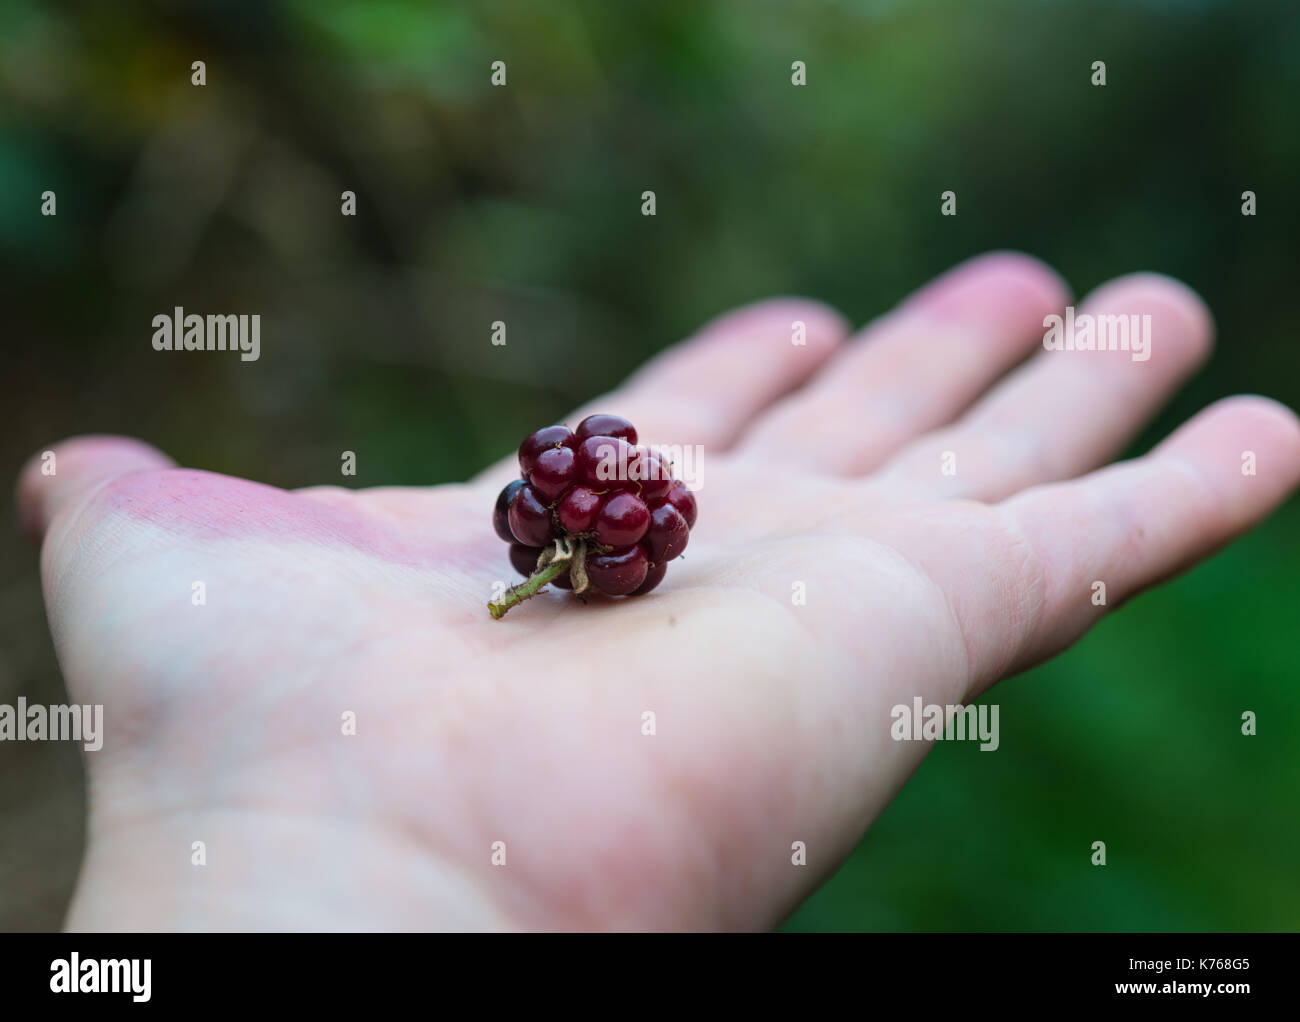 Hand holding a blackberry Stock Photo